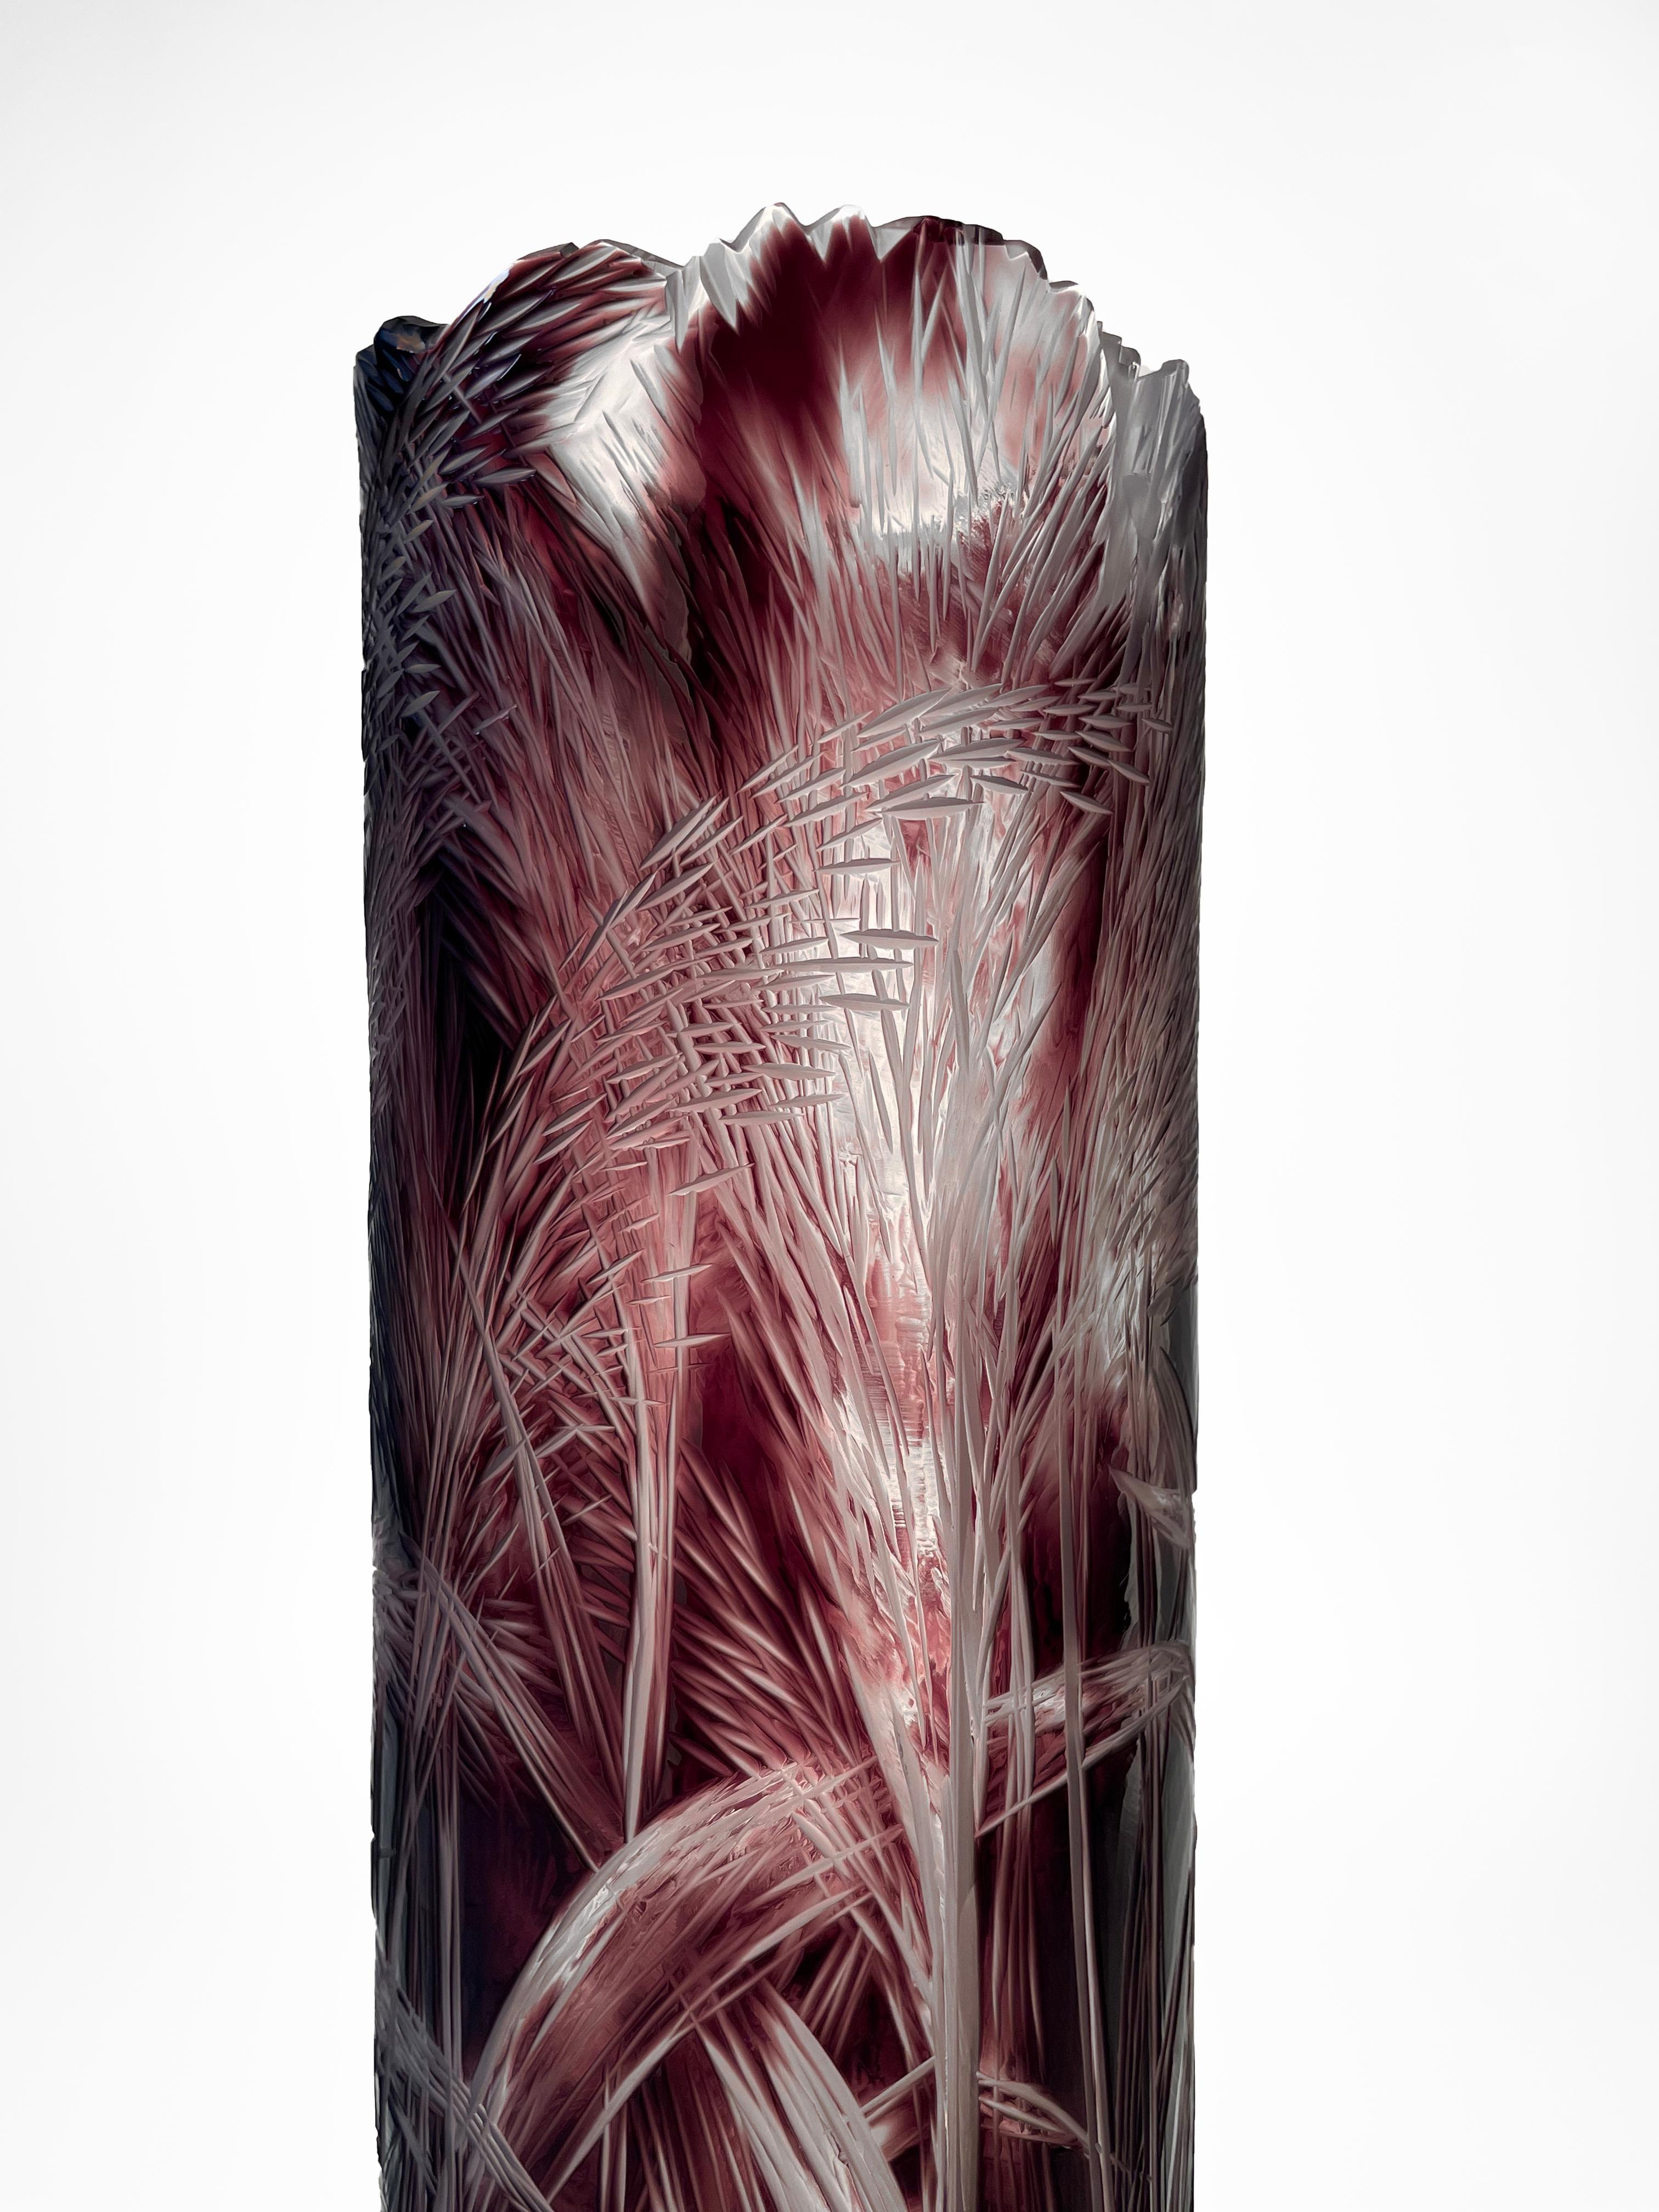 Vase is made of overlayed glass and having cylindrical shape. The organic hand-engraved motif is engraved through the purple solid glass all the way to the crystal glass layer. The engraving depicts reeds, natural stalks. The engraving is created